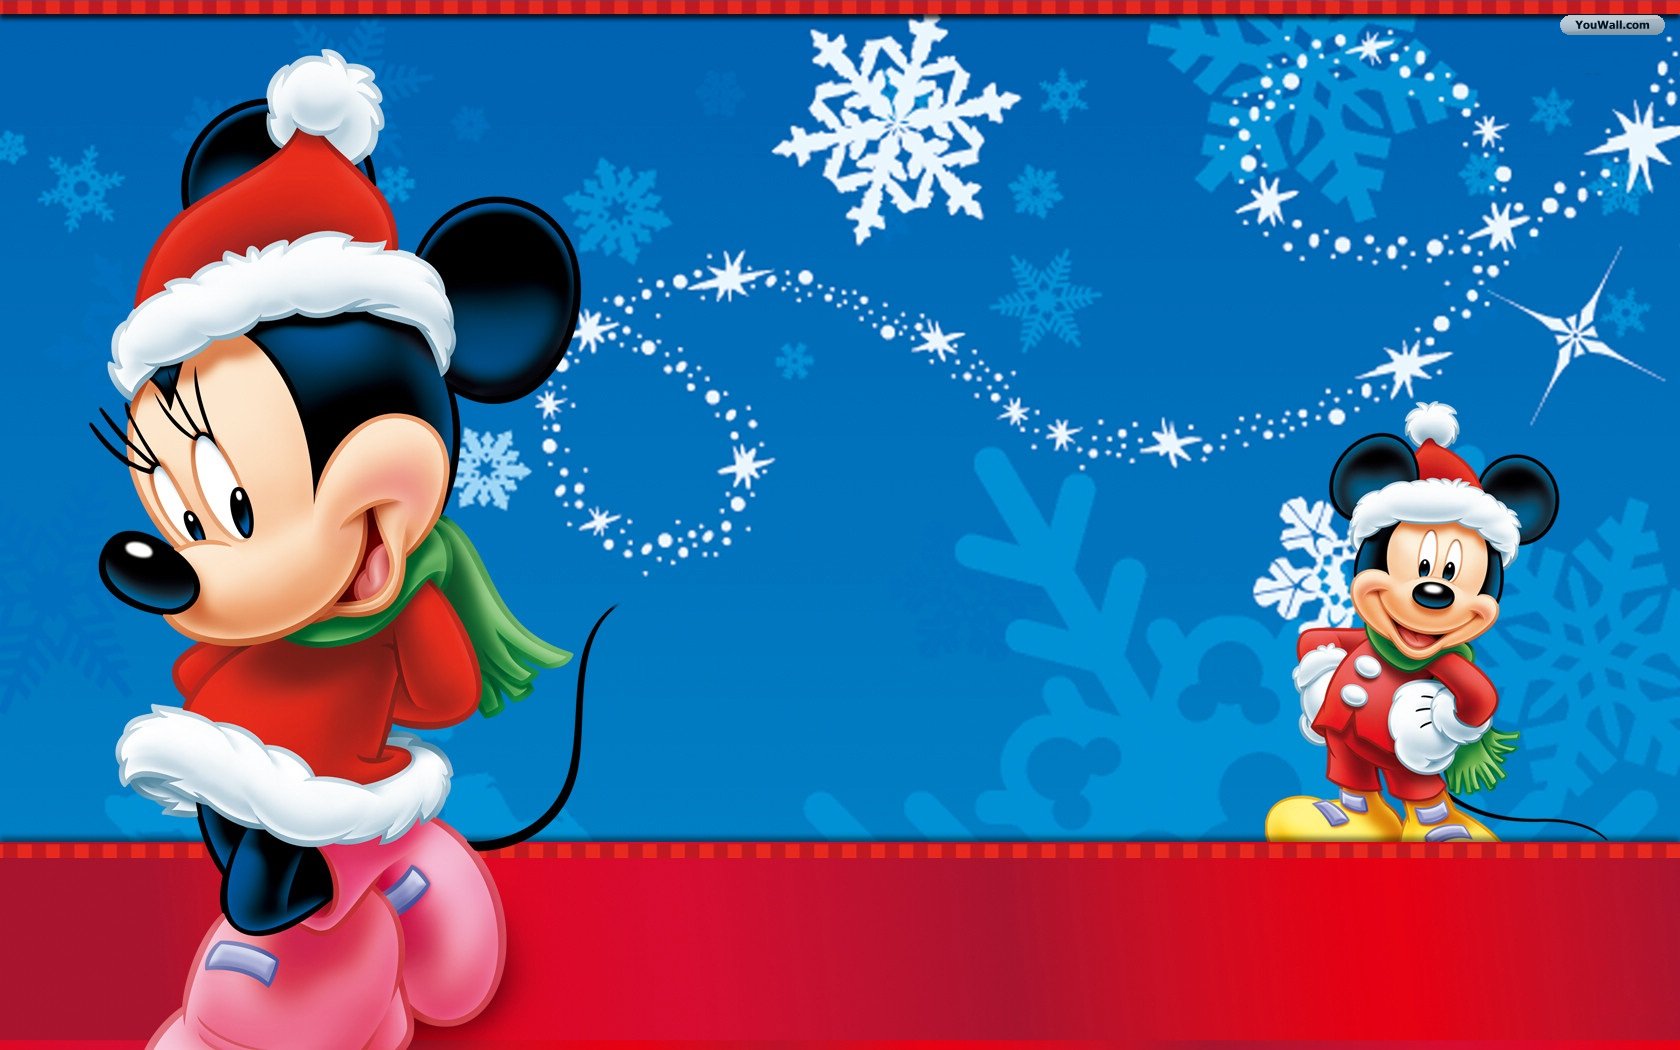 Free Christmas Micky And Minnie Backgrounds For PowerPoint ...